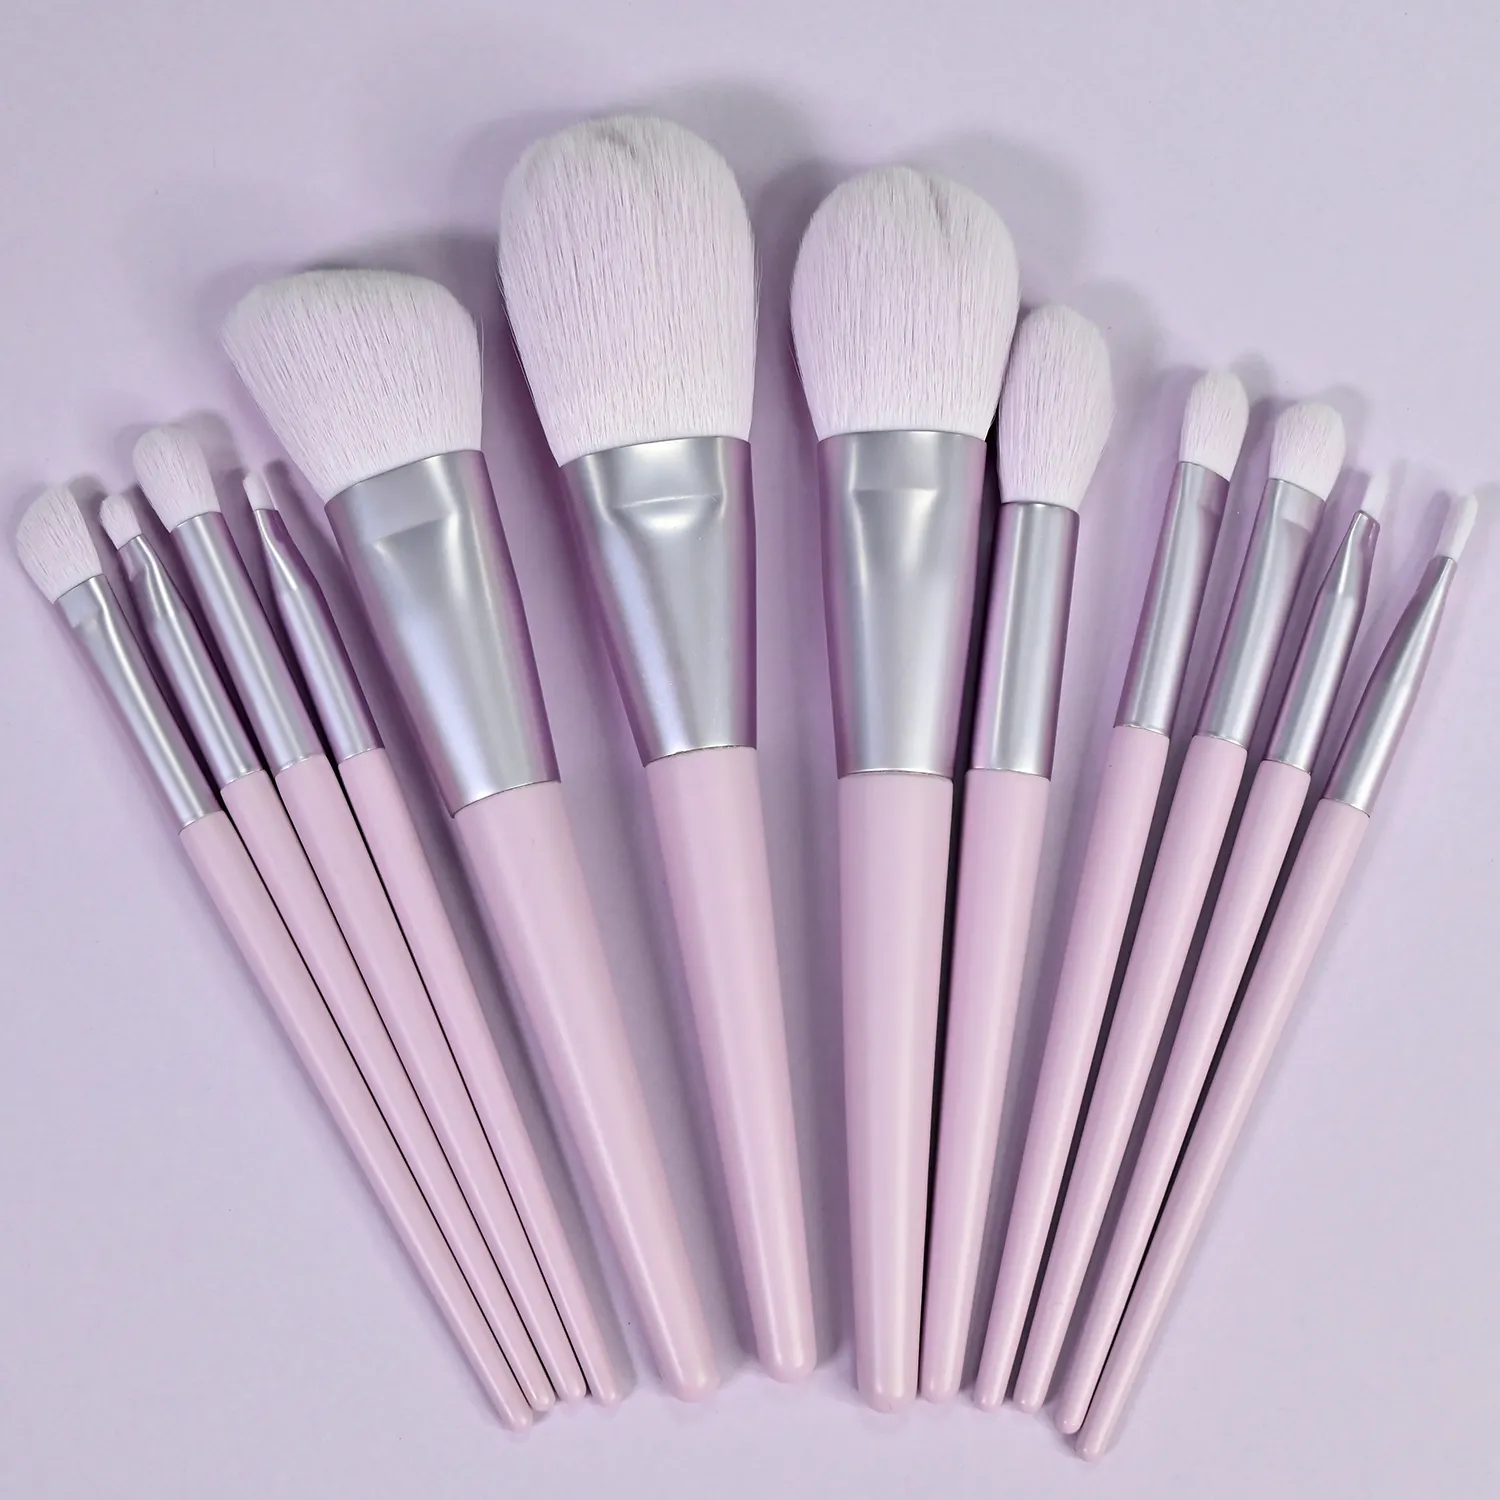 OEM/ODM Golden Synthetic Hair Cosmetic Makeup Brush Set With Natural Hair